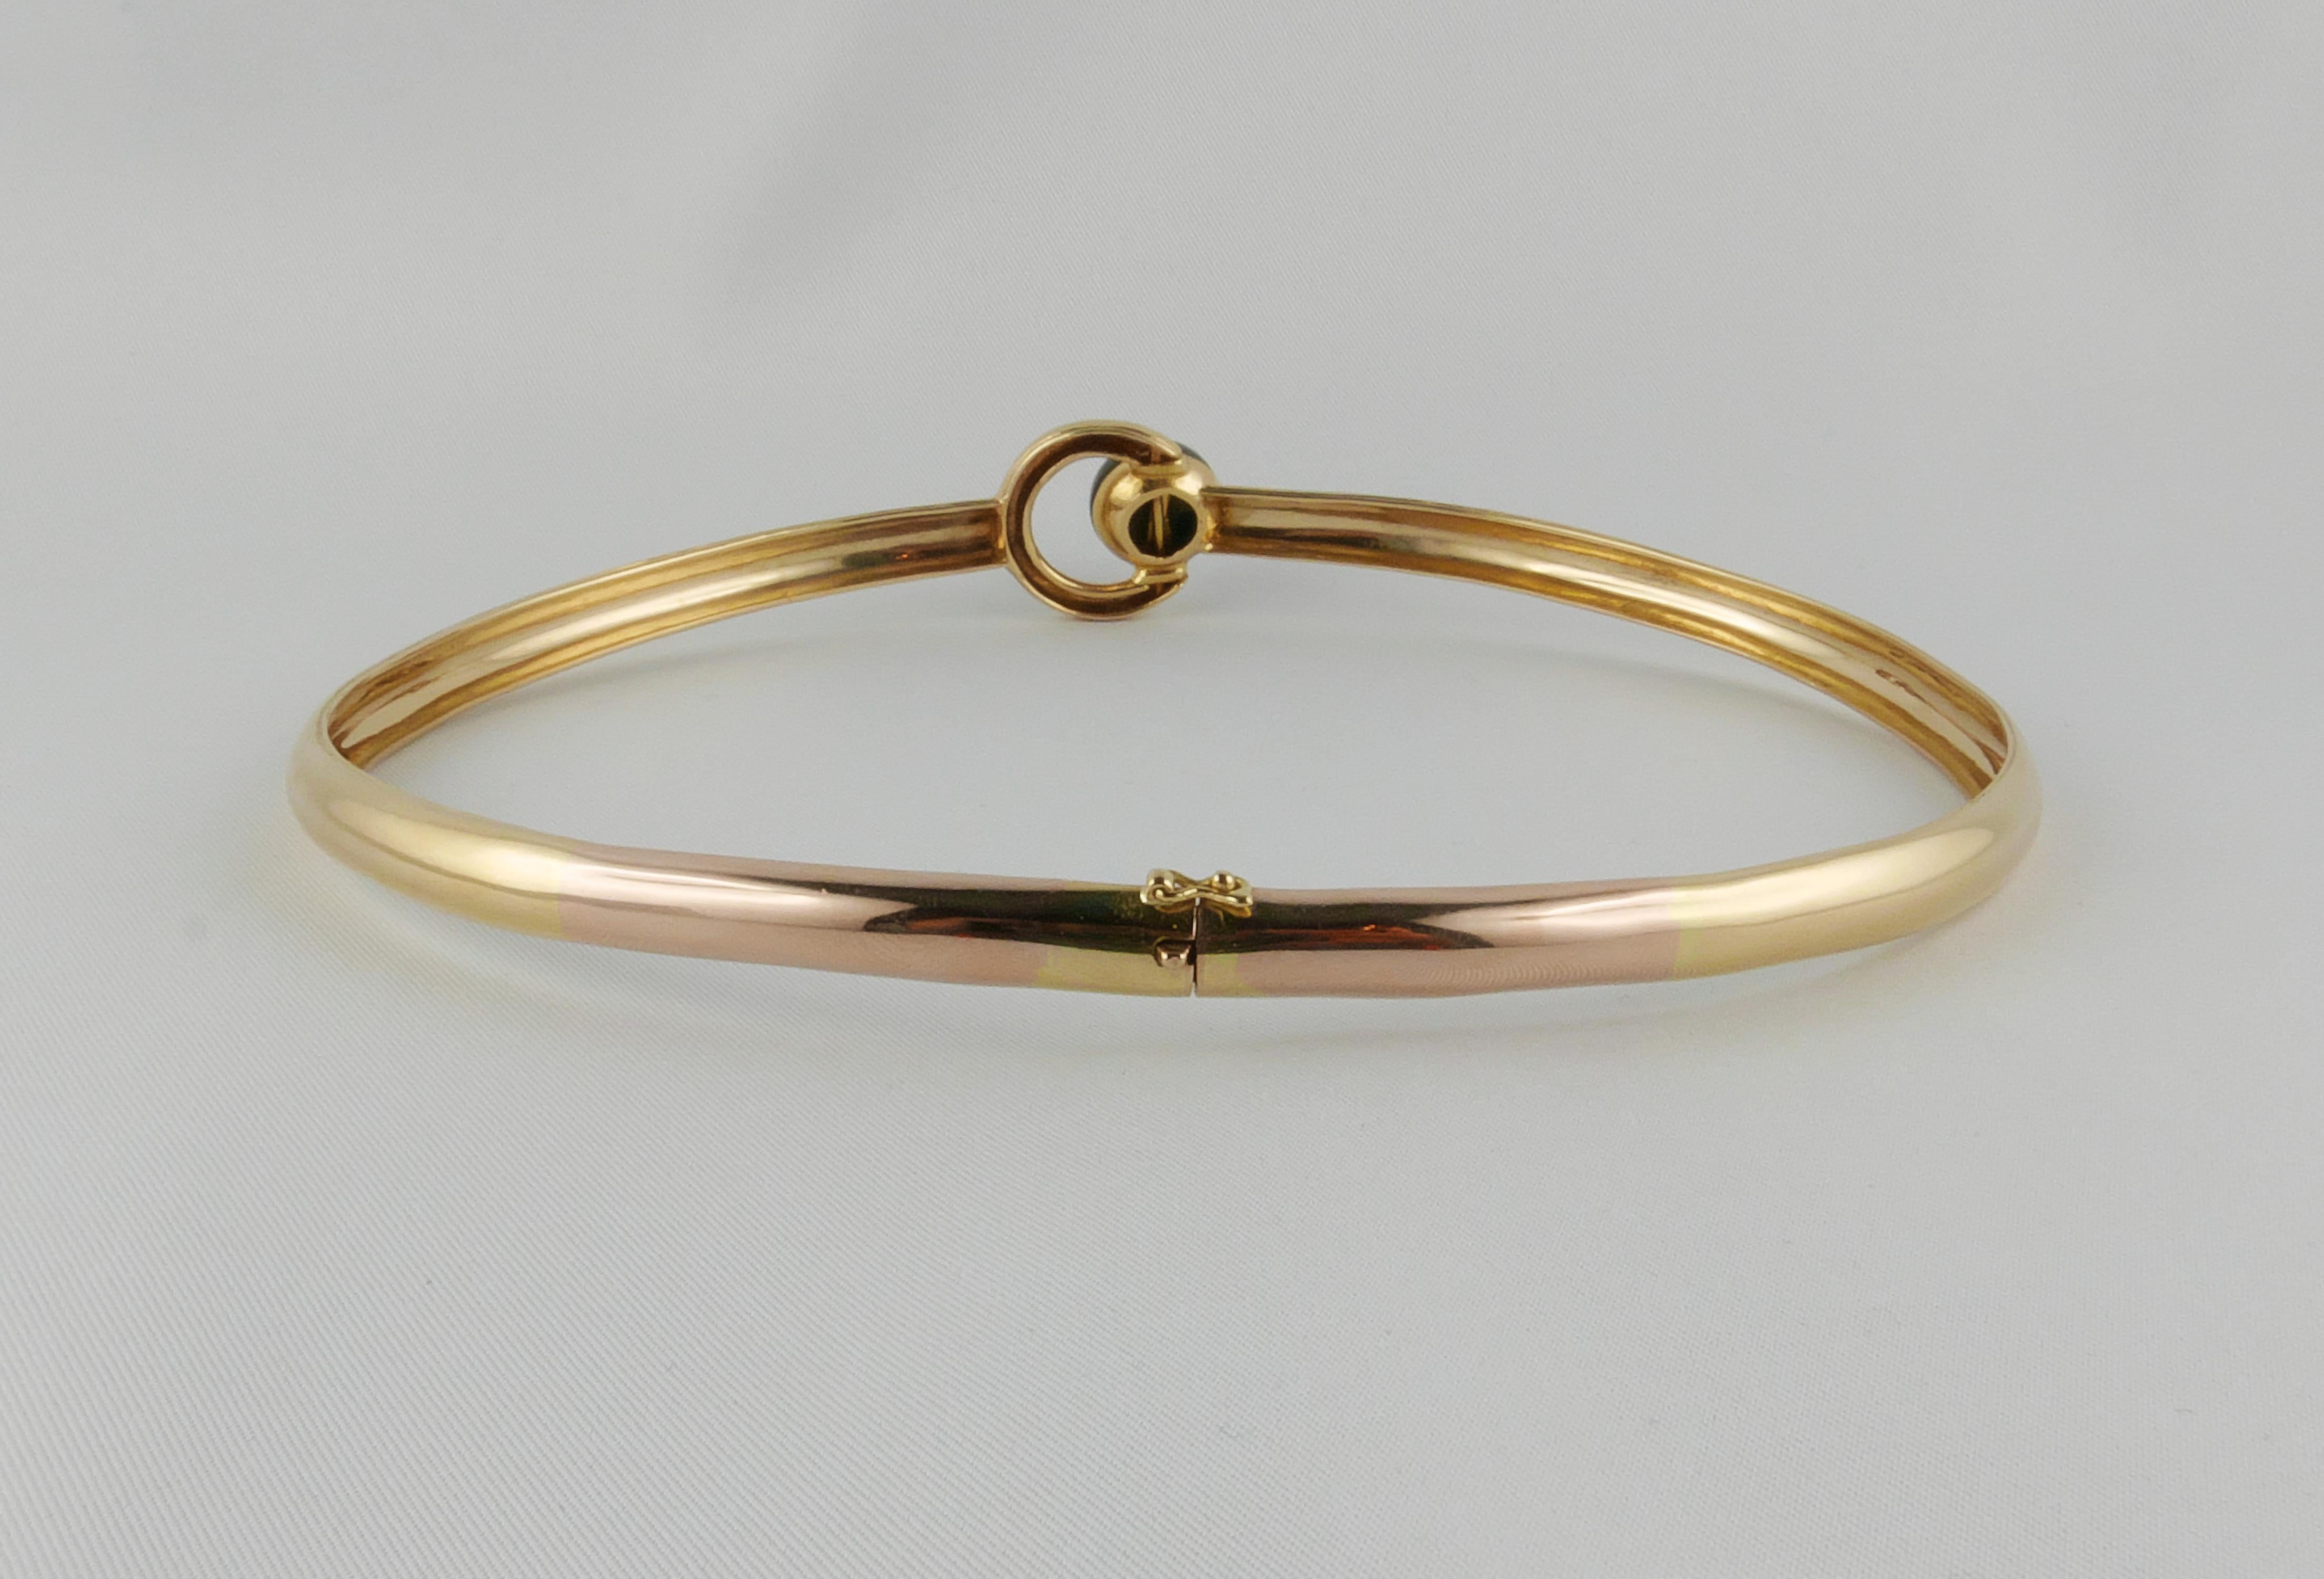 Chic and timeless 1970’s Cartier Choker  beautifully crafted in 18k Yellow Gold. This elegant and extremely stylish collar centered with an Onyx round  cabochon has an essential but still very sleek design. It is a wonderful collector's piece, a